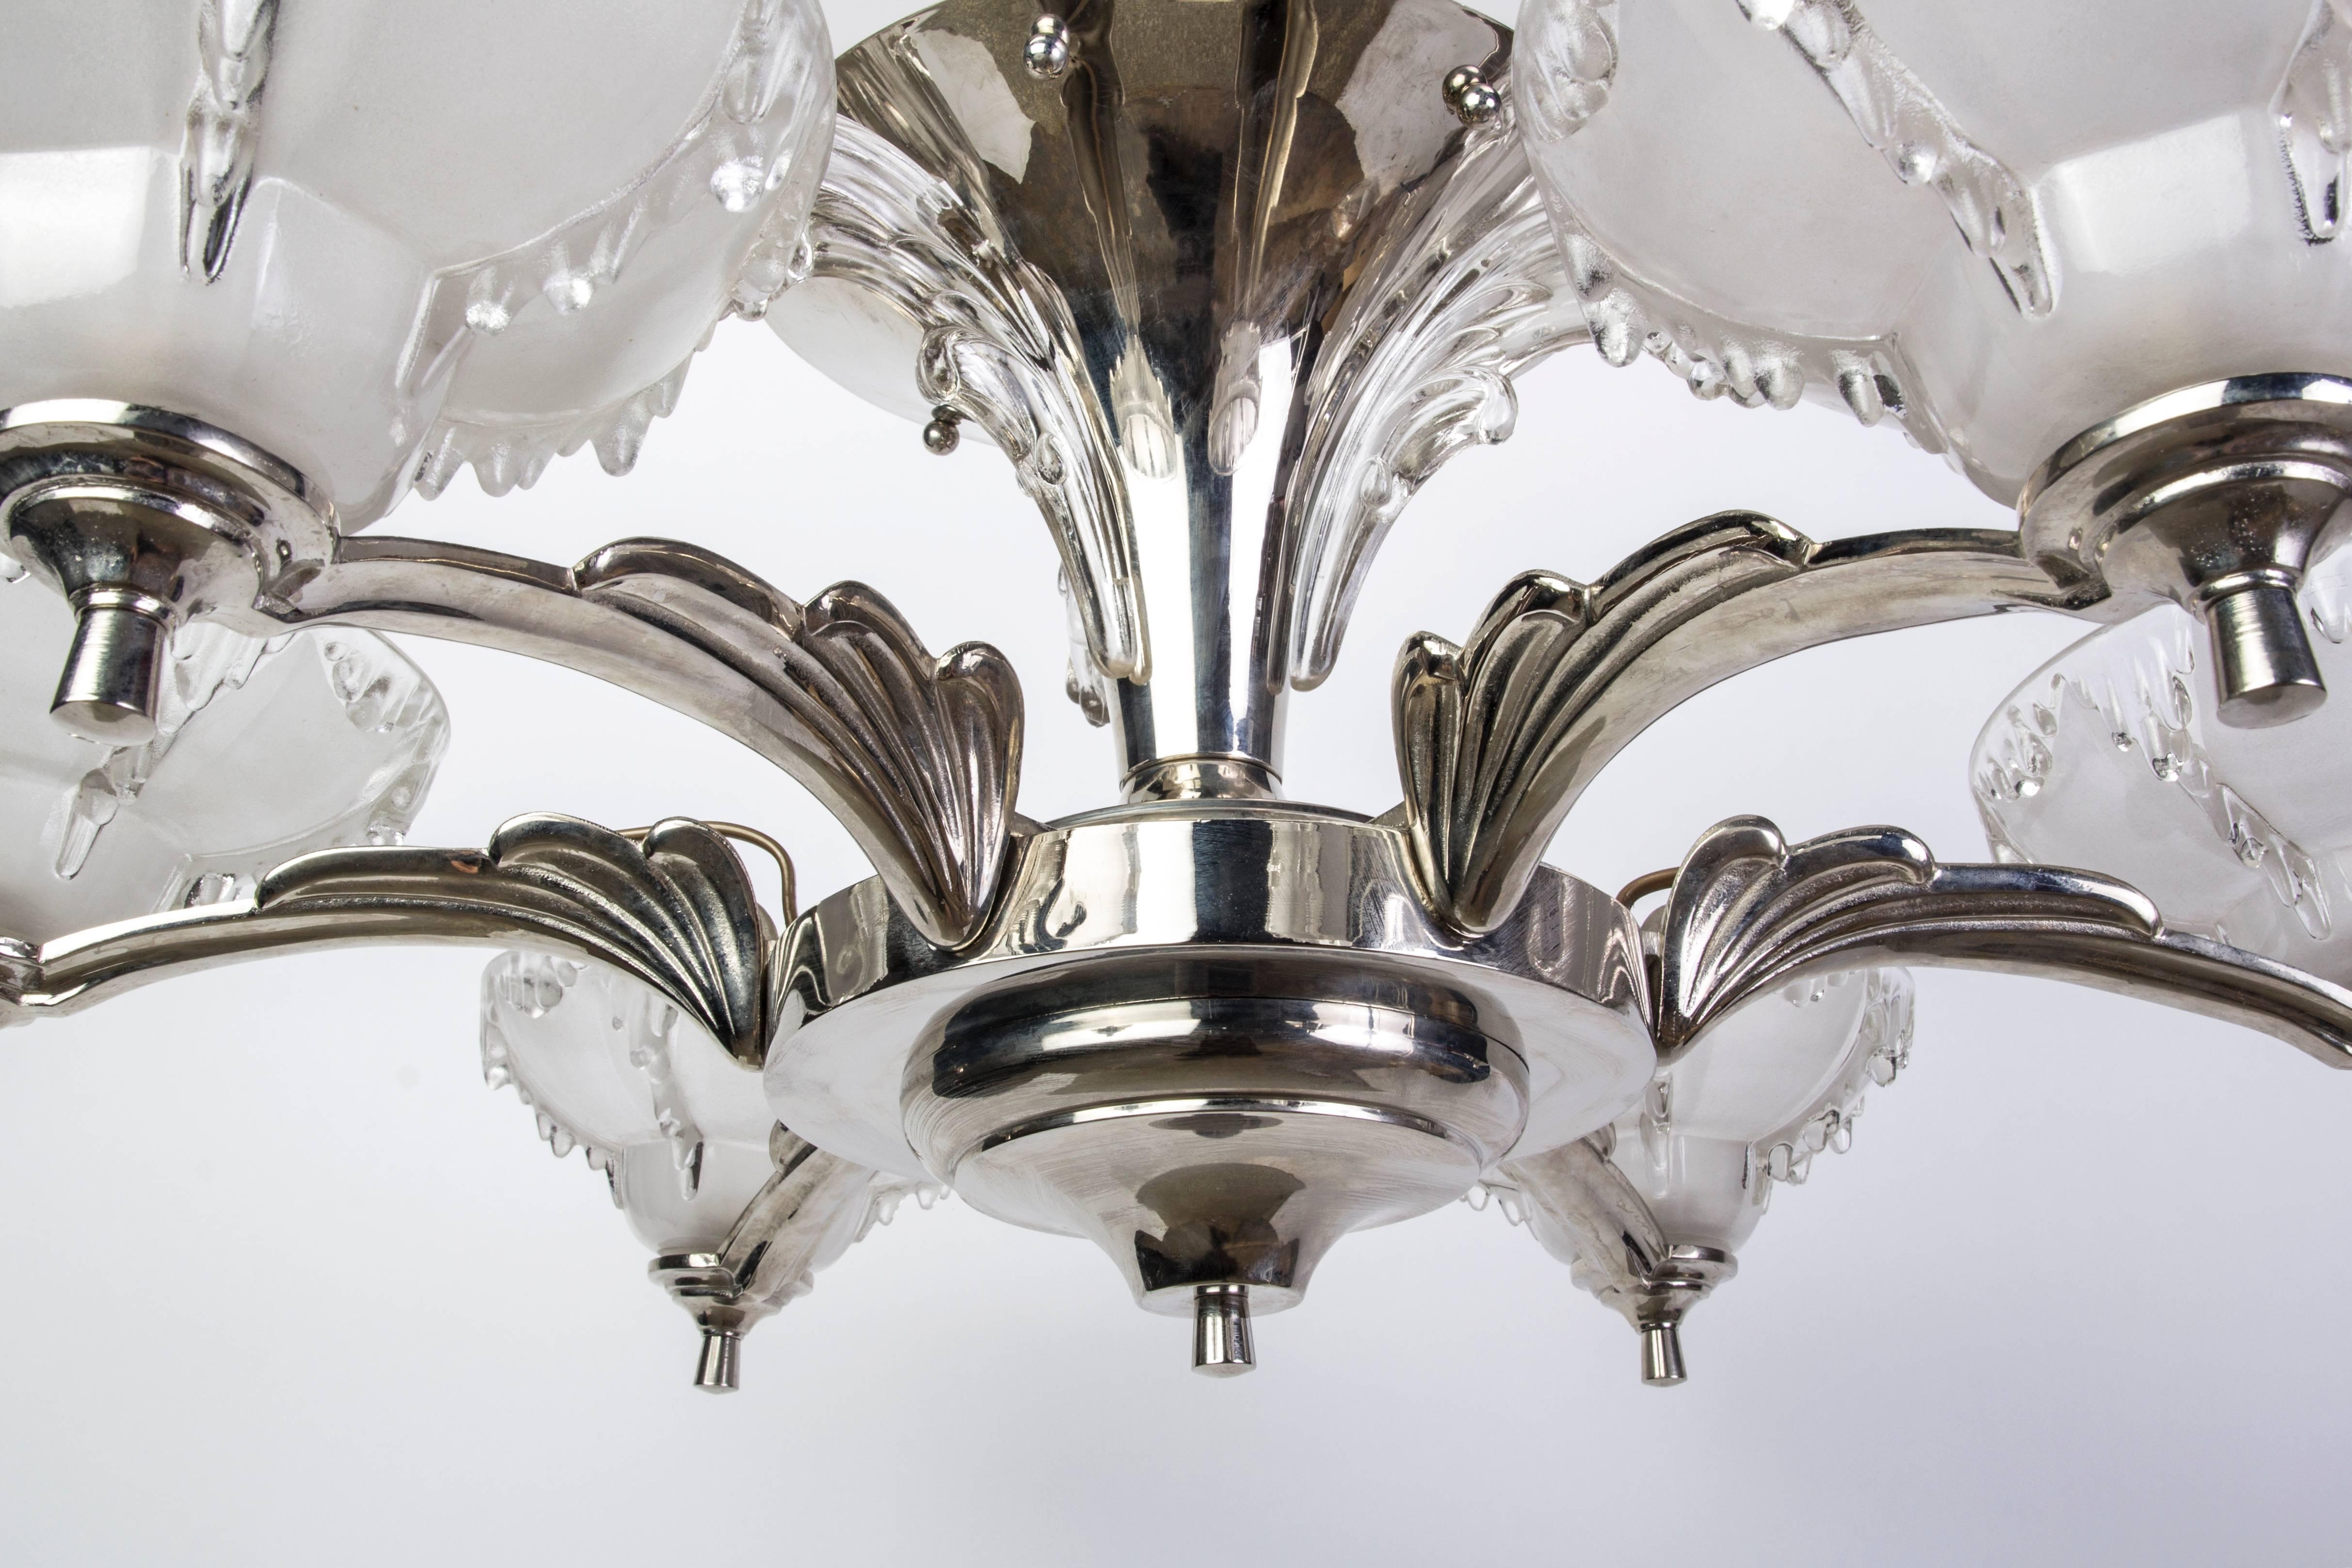 This impressive 1930s French Art Deco chandelier was designed and signed by Petitot. The frame has (three) trumpet cascading tiers that is composed of nickel-plated copper. The (six) lights are encased in relief frosted glass with icicle detailing.